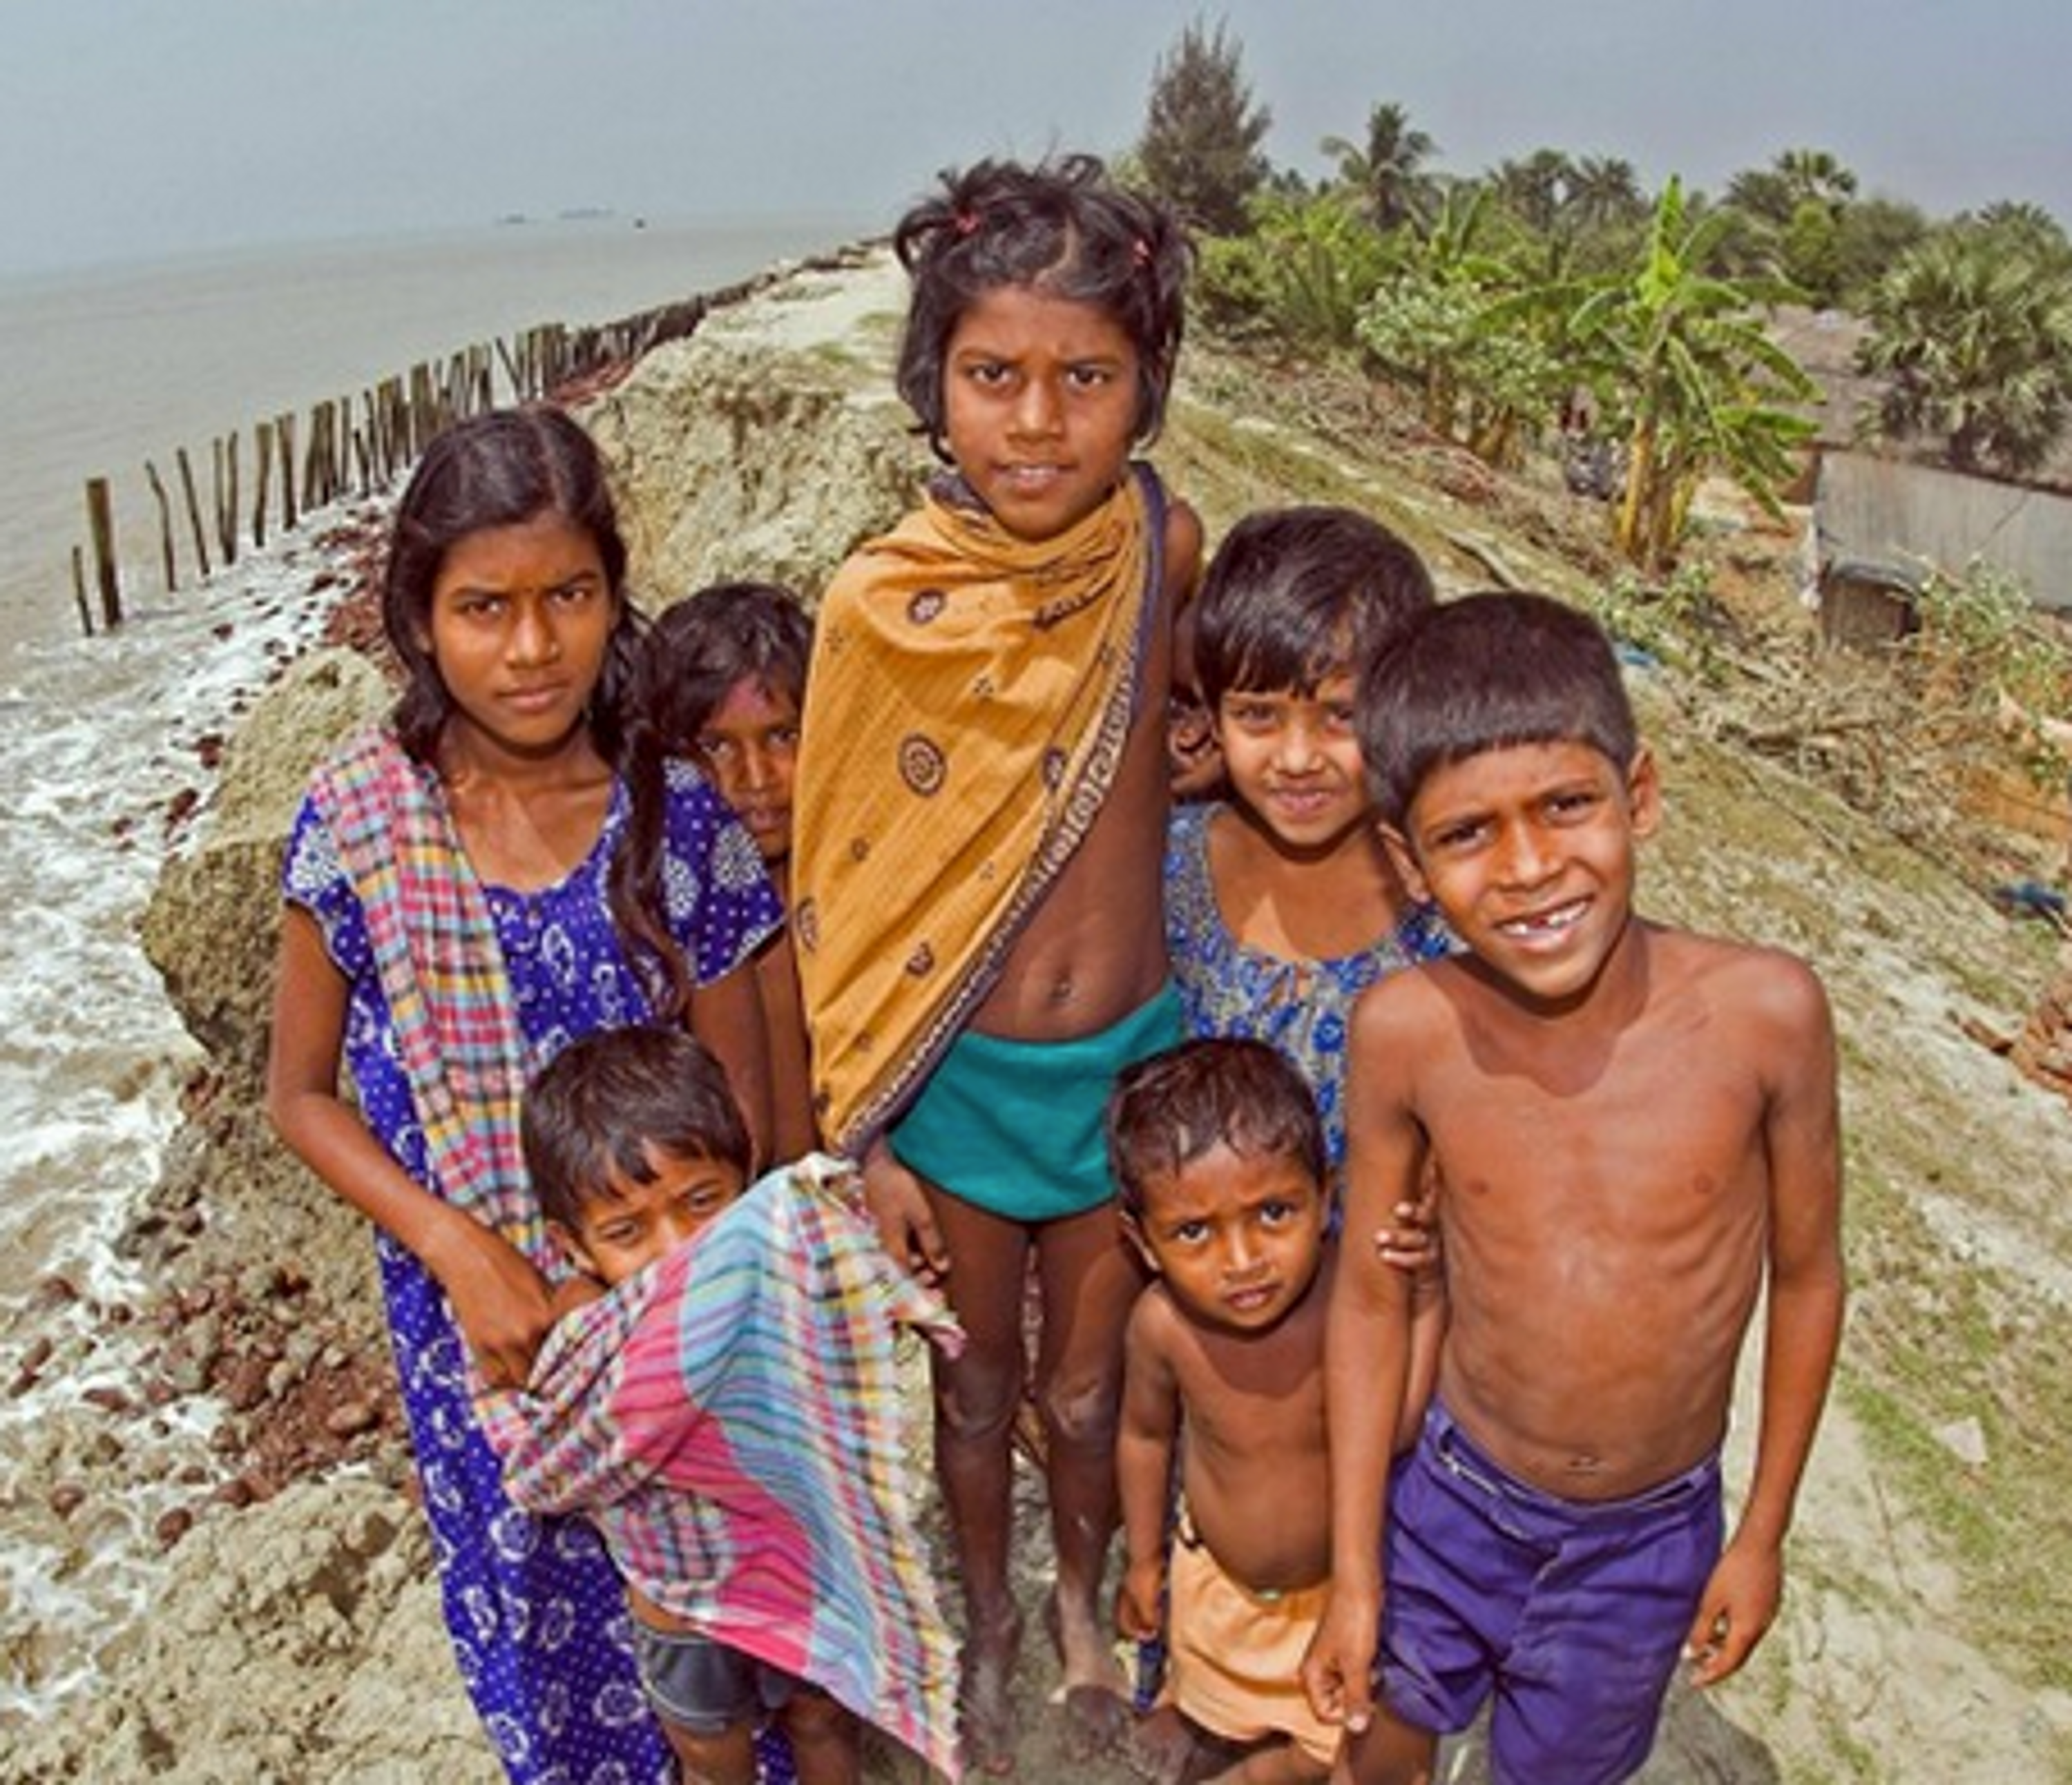 Climate refugees need our help